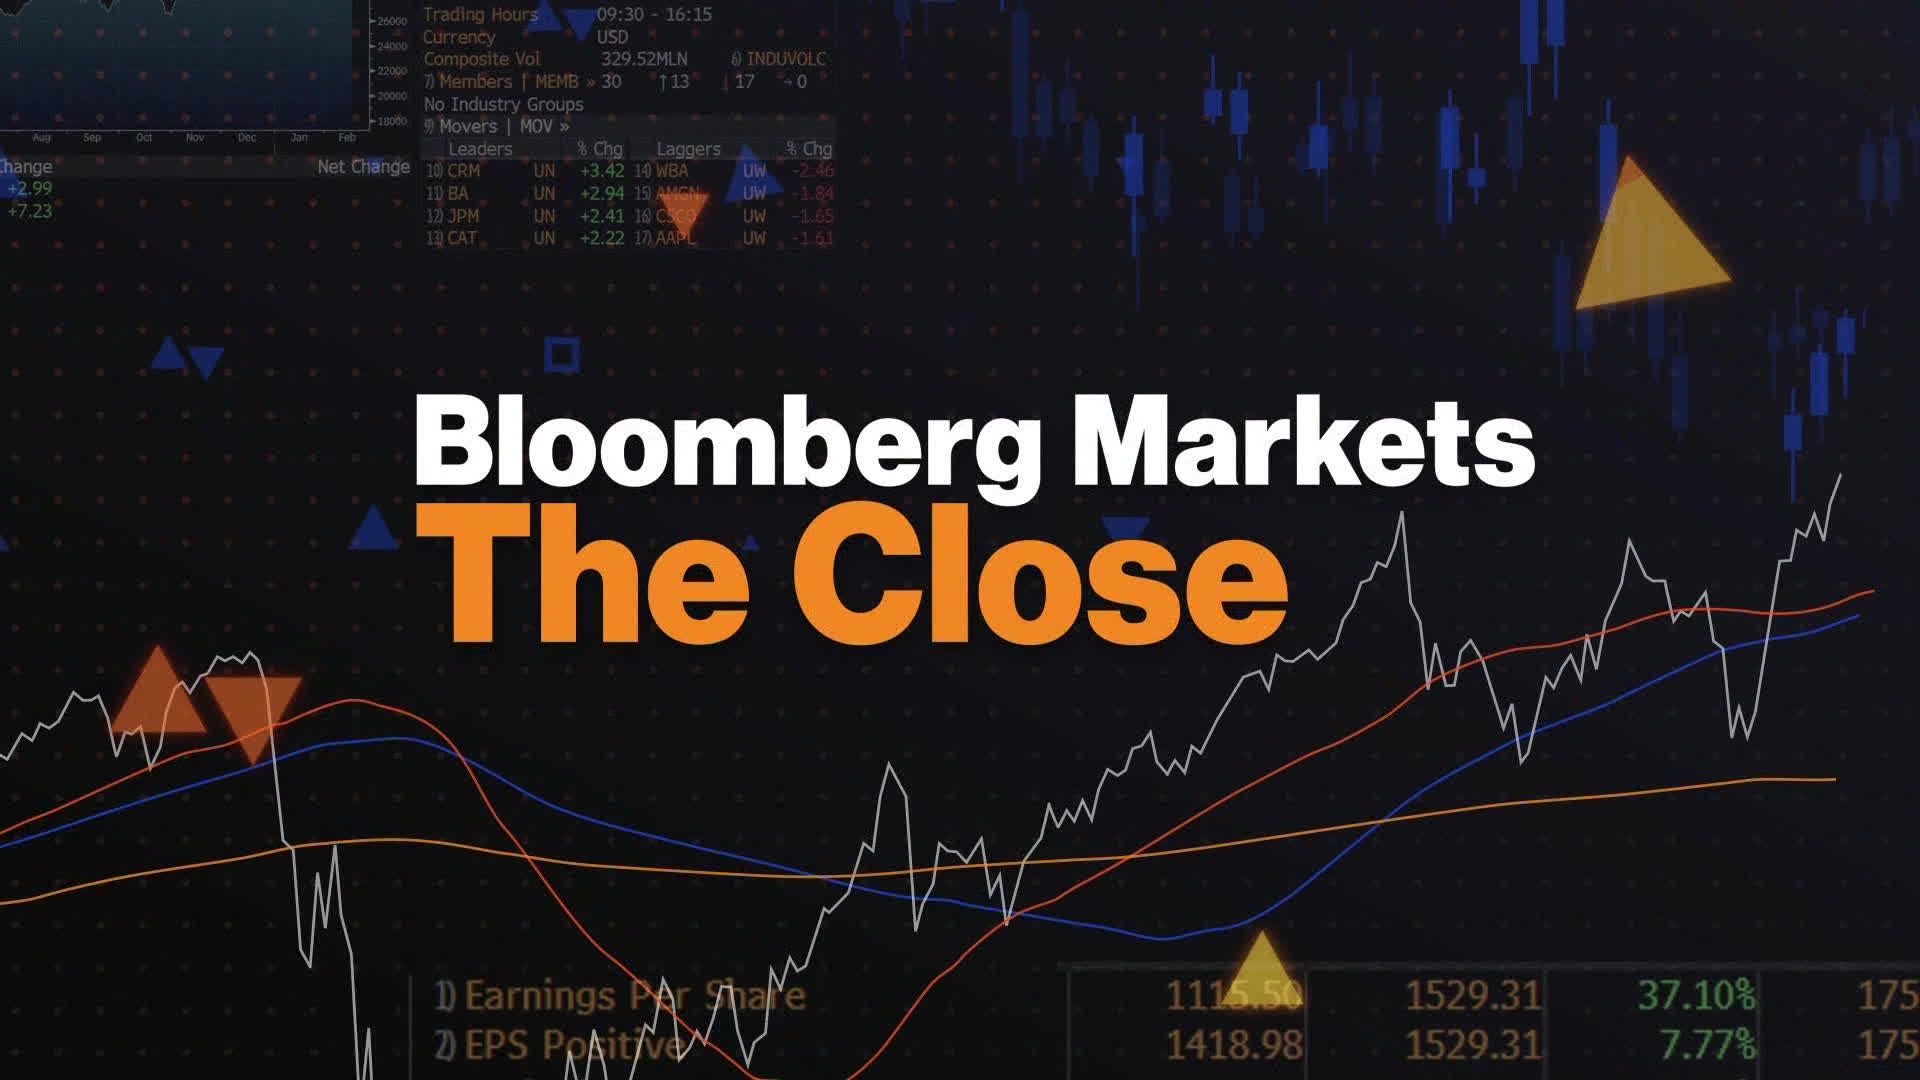 Watch Bloomberg Markets The Close(11/23/2022) image pic pic